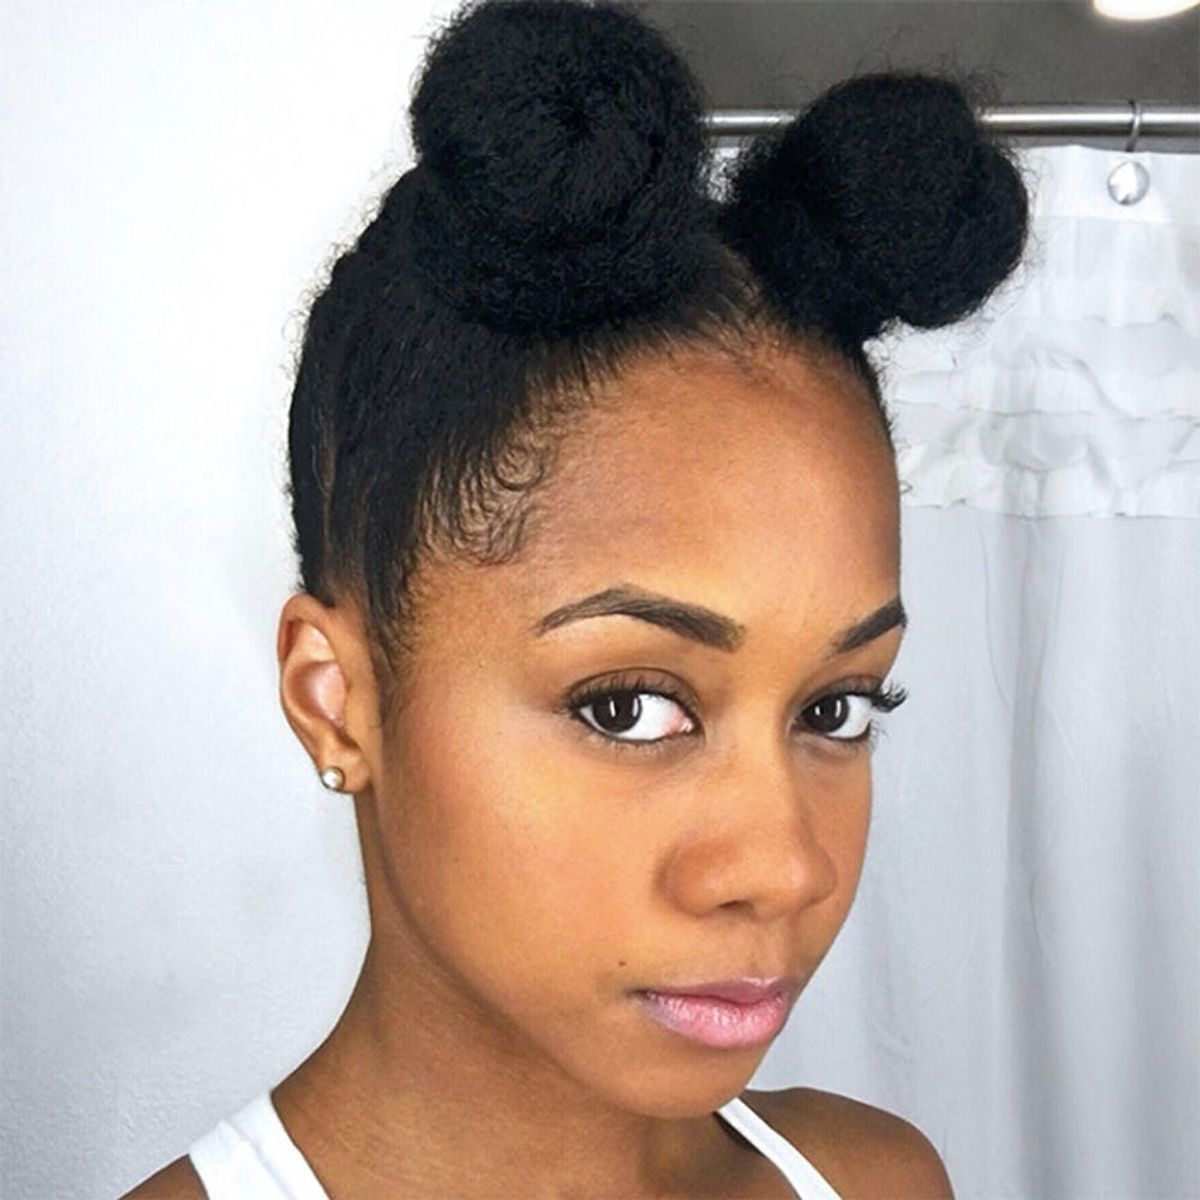 9 Easy Post-Swimming Hairstyles for Wet Strands